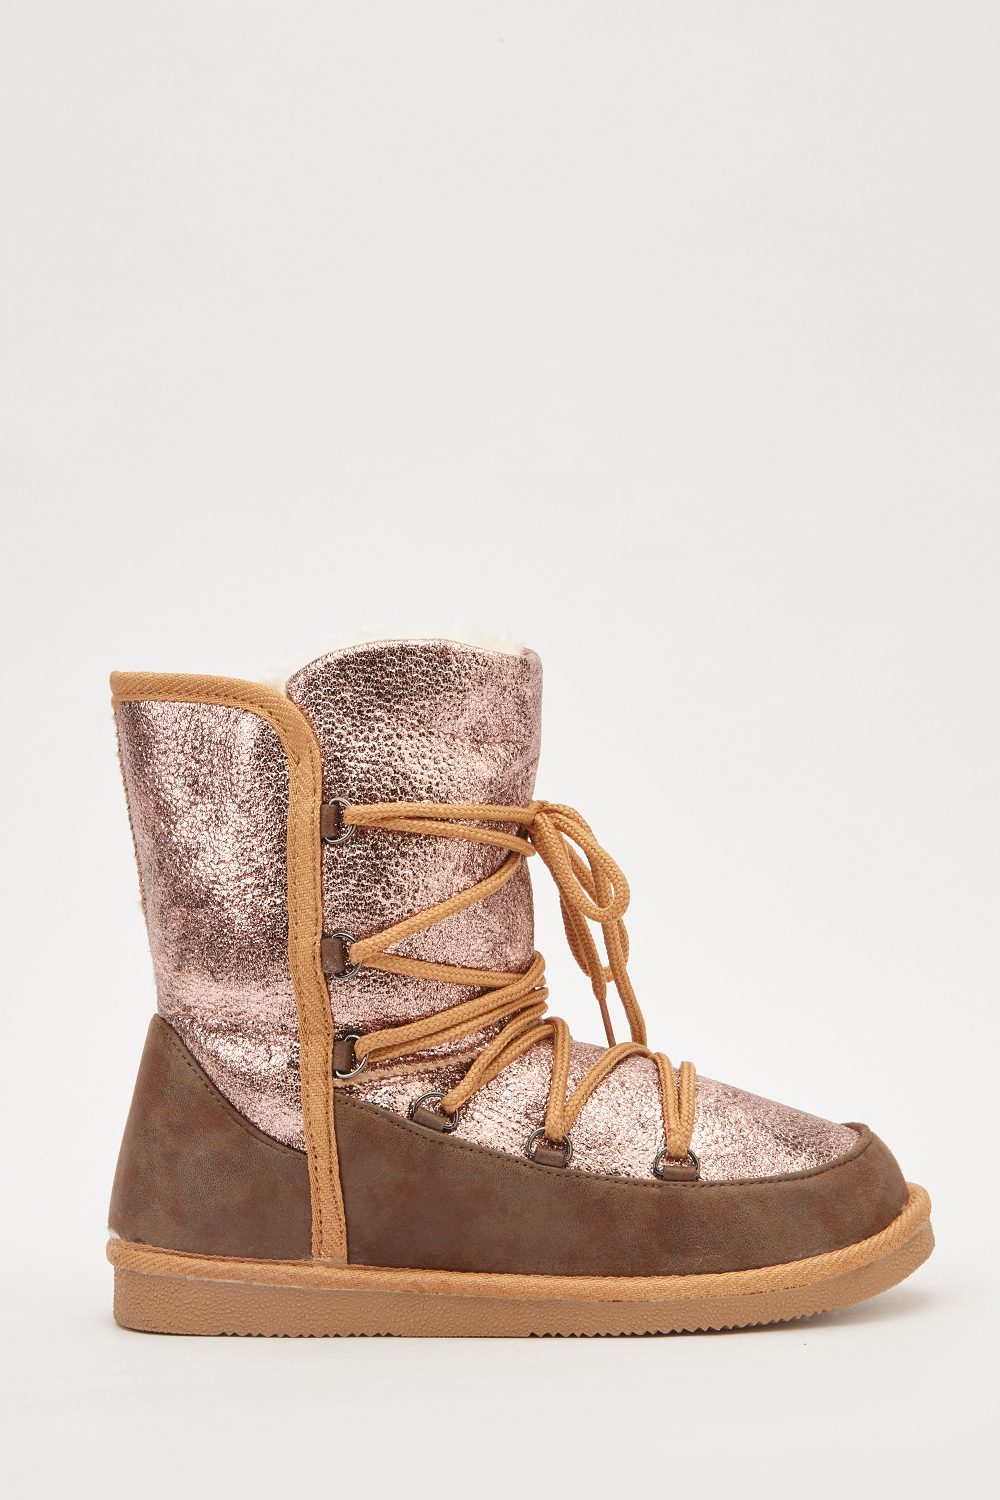 rose gold moon boots